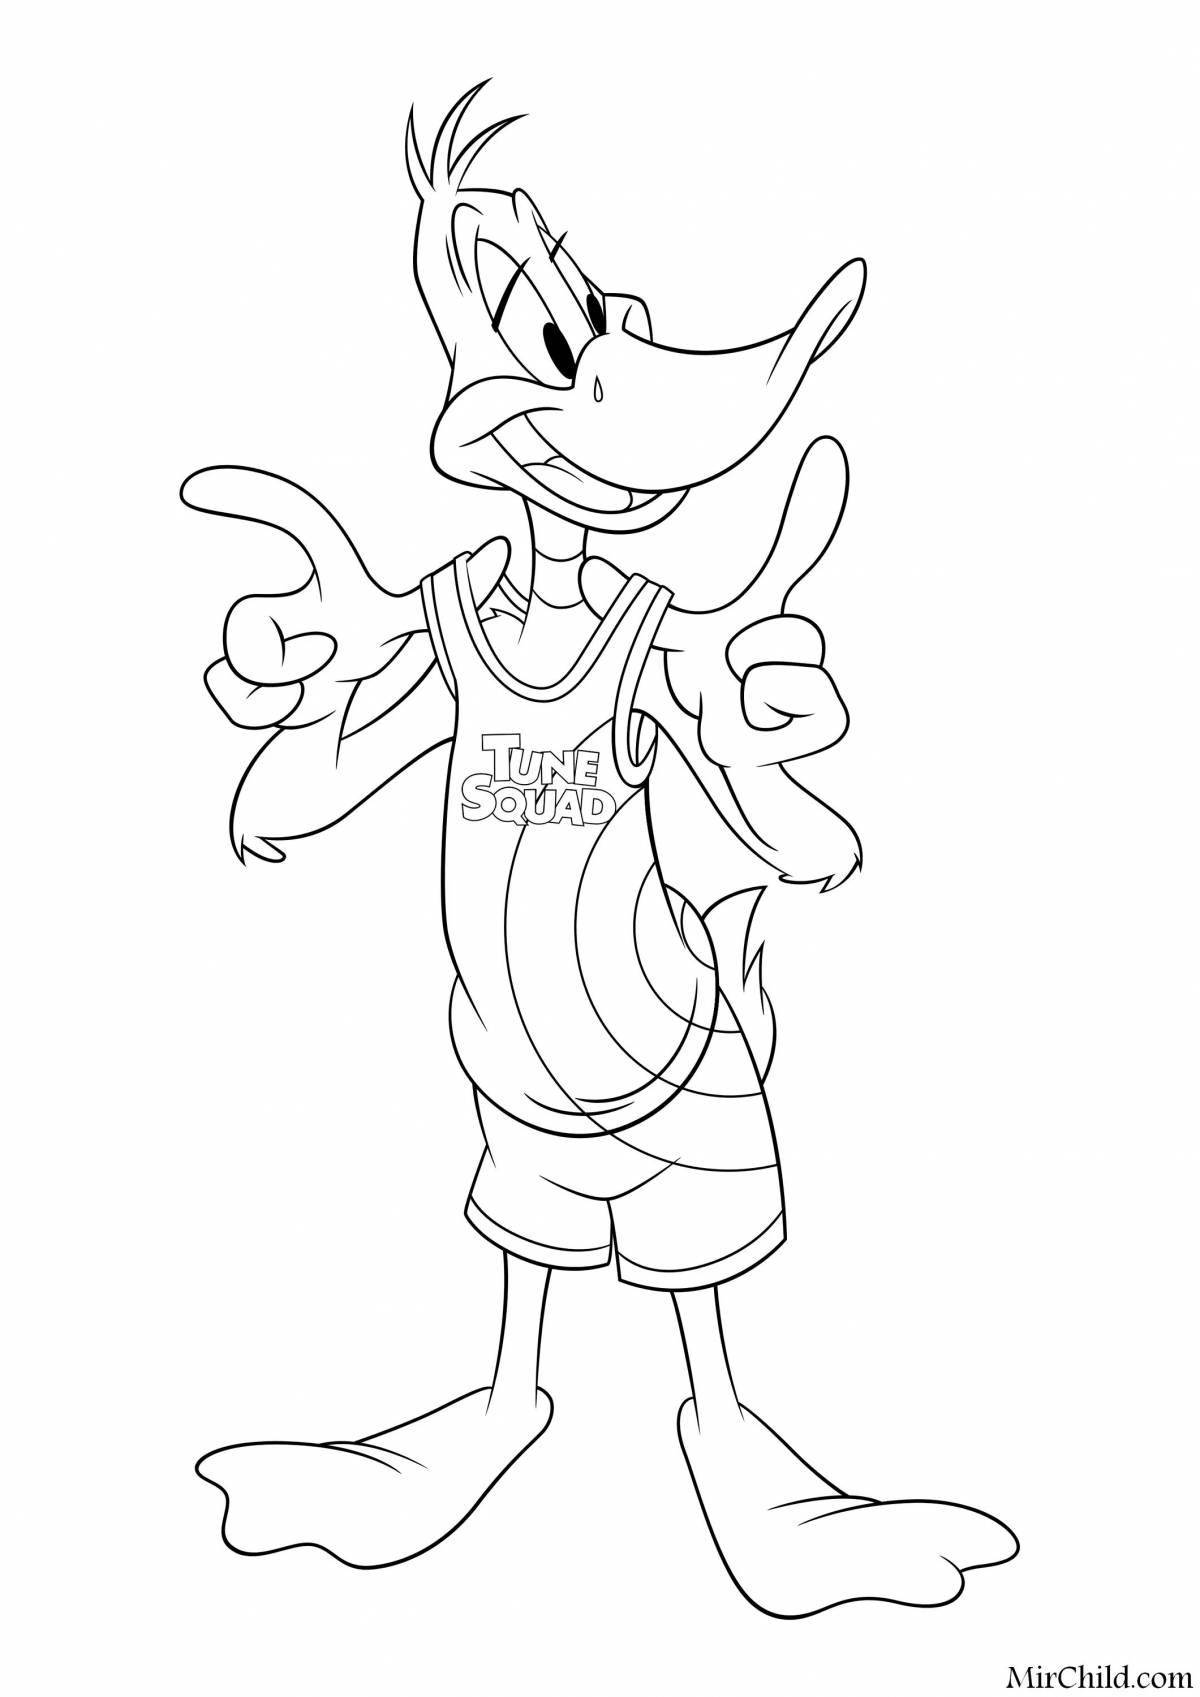 Great space jam coloring page